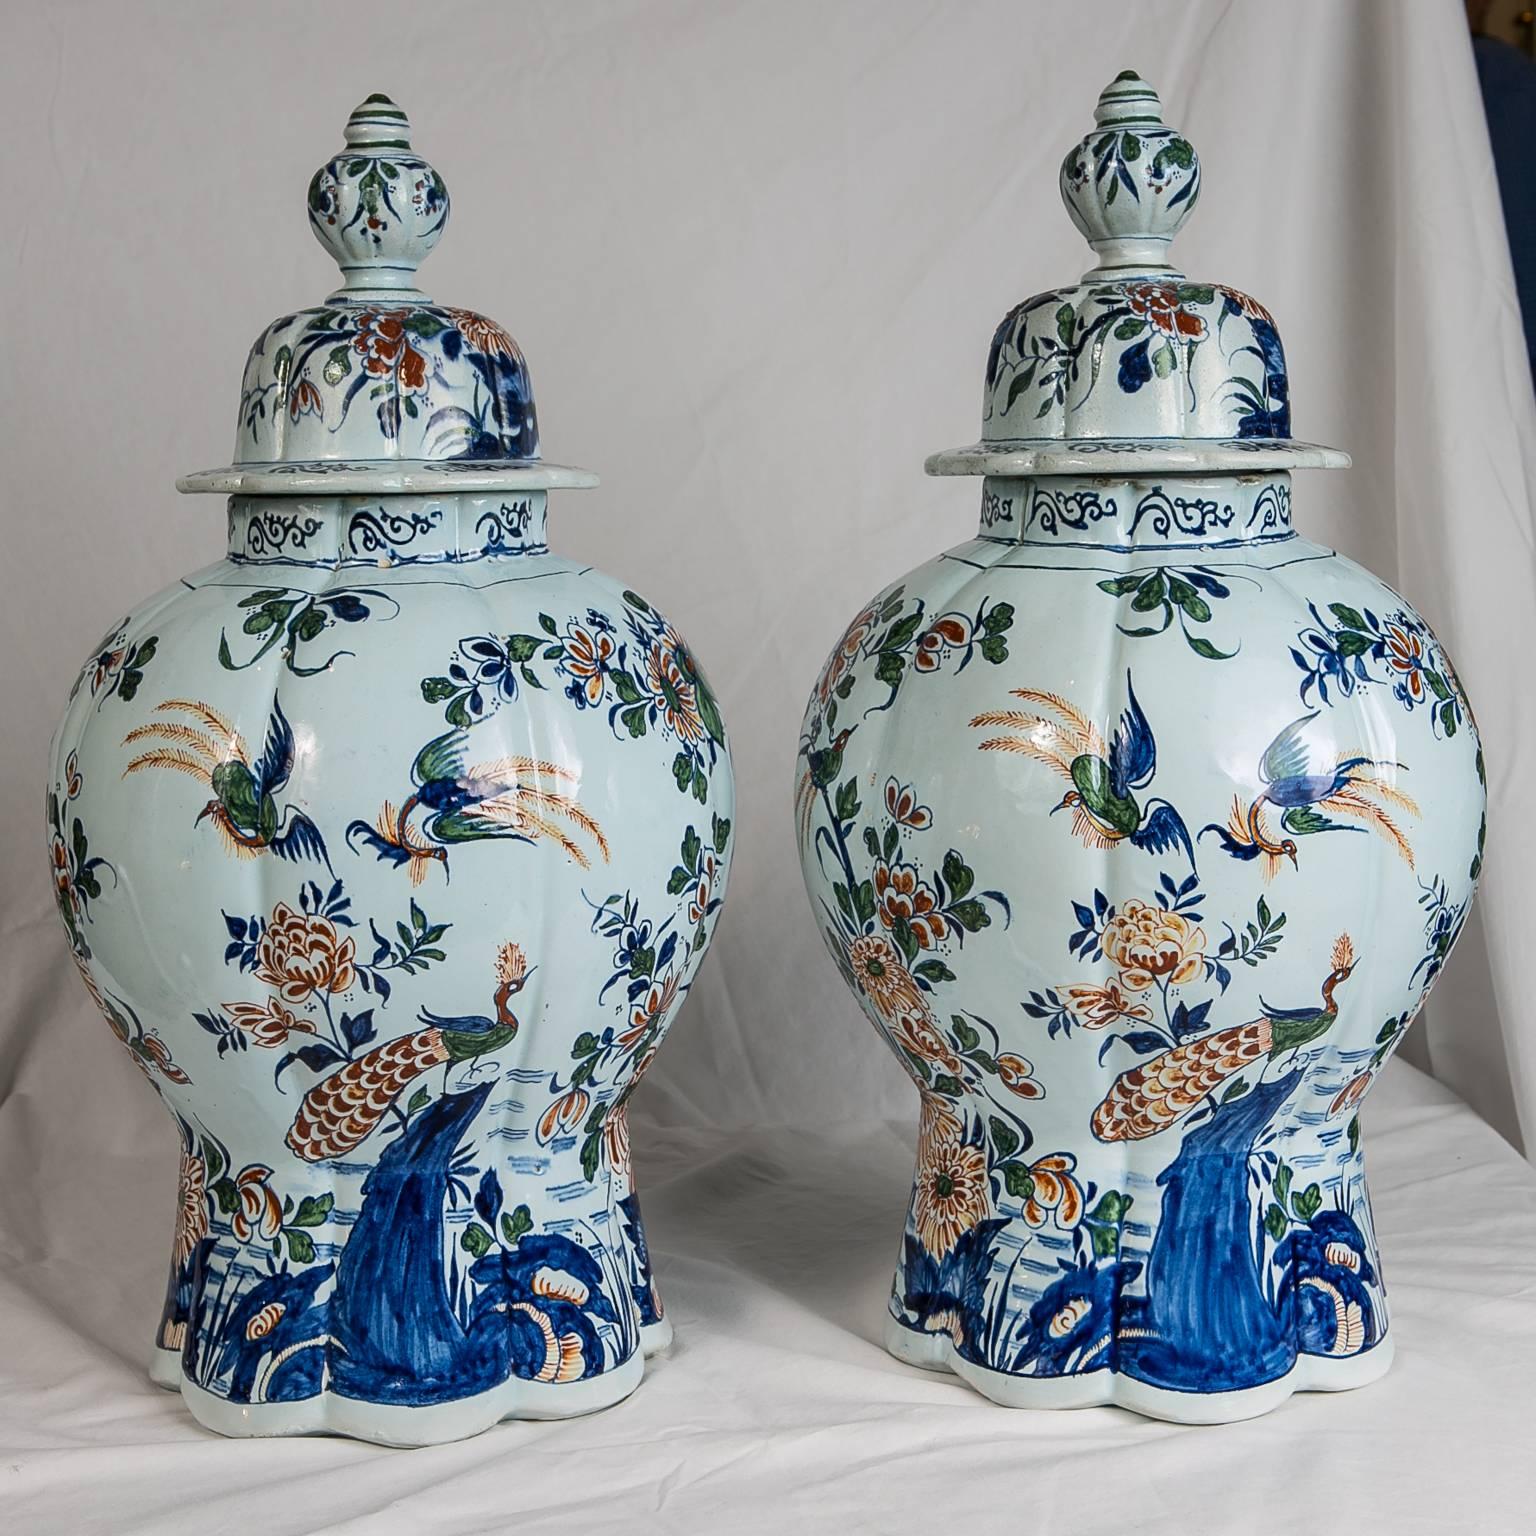 A pair of Dutch Delft ginger jars painted in a polychrome palette of strong orange, green, and blue with touches of yellow. The jars are decorated with a beautiful all around scene showing long-tailed birds with blue wings, a green breast, a red